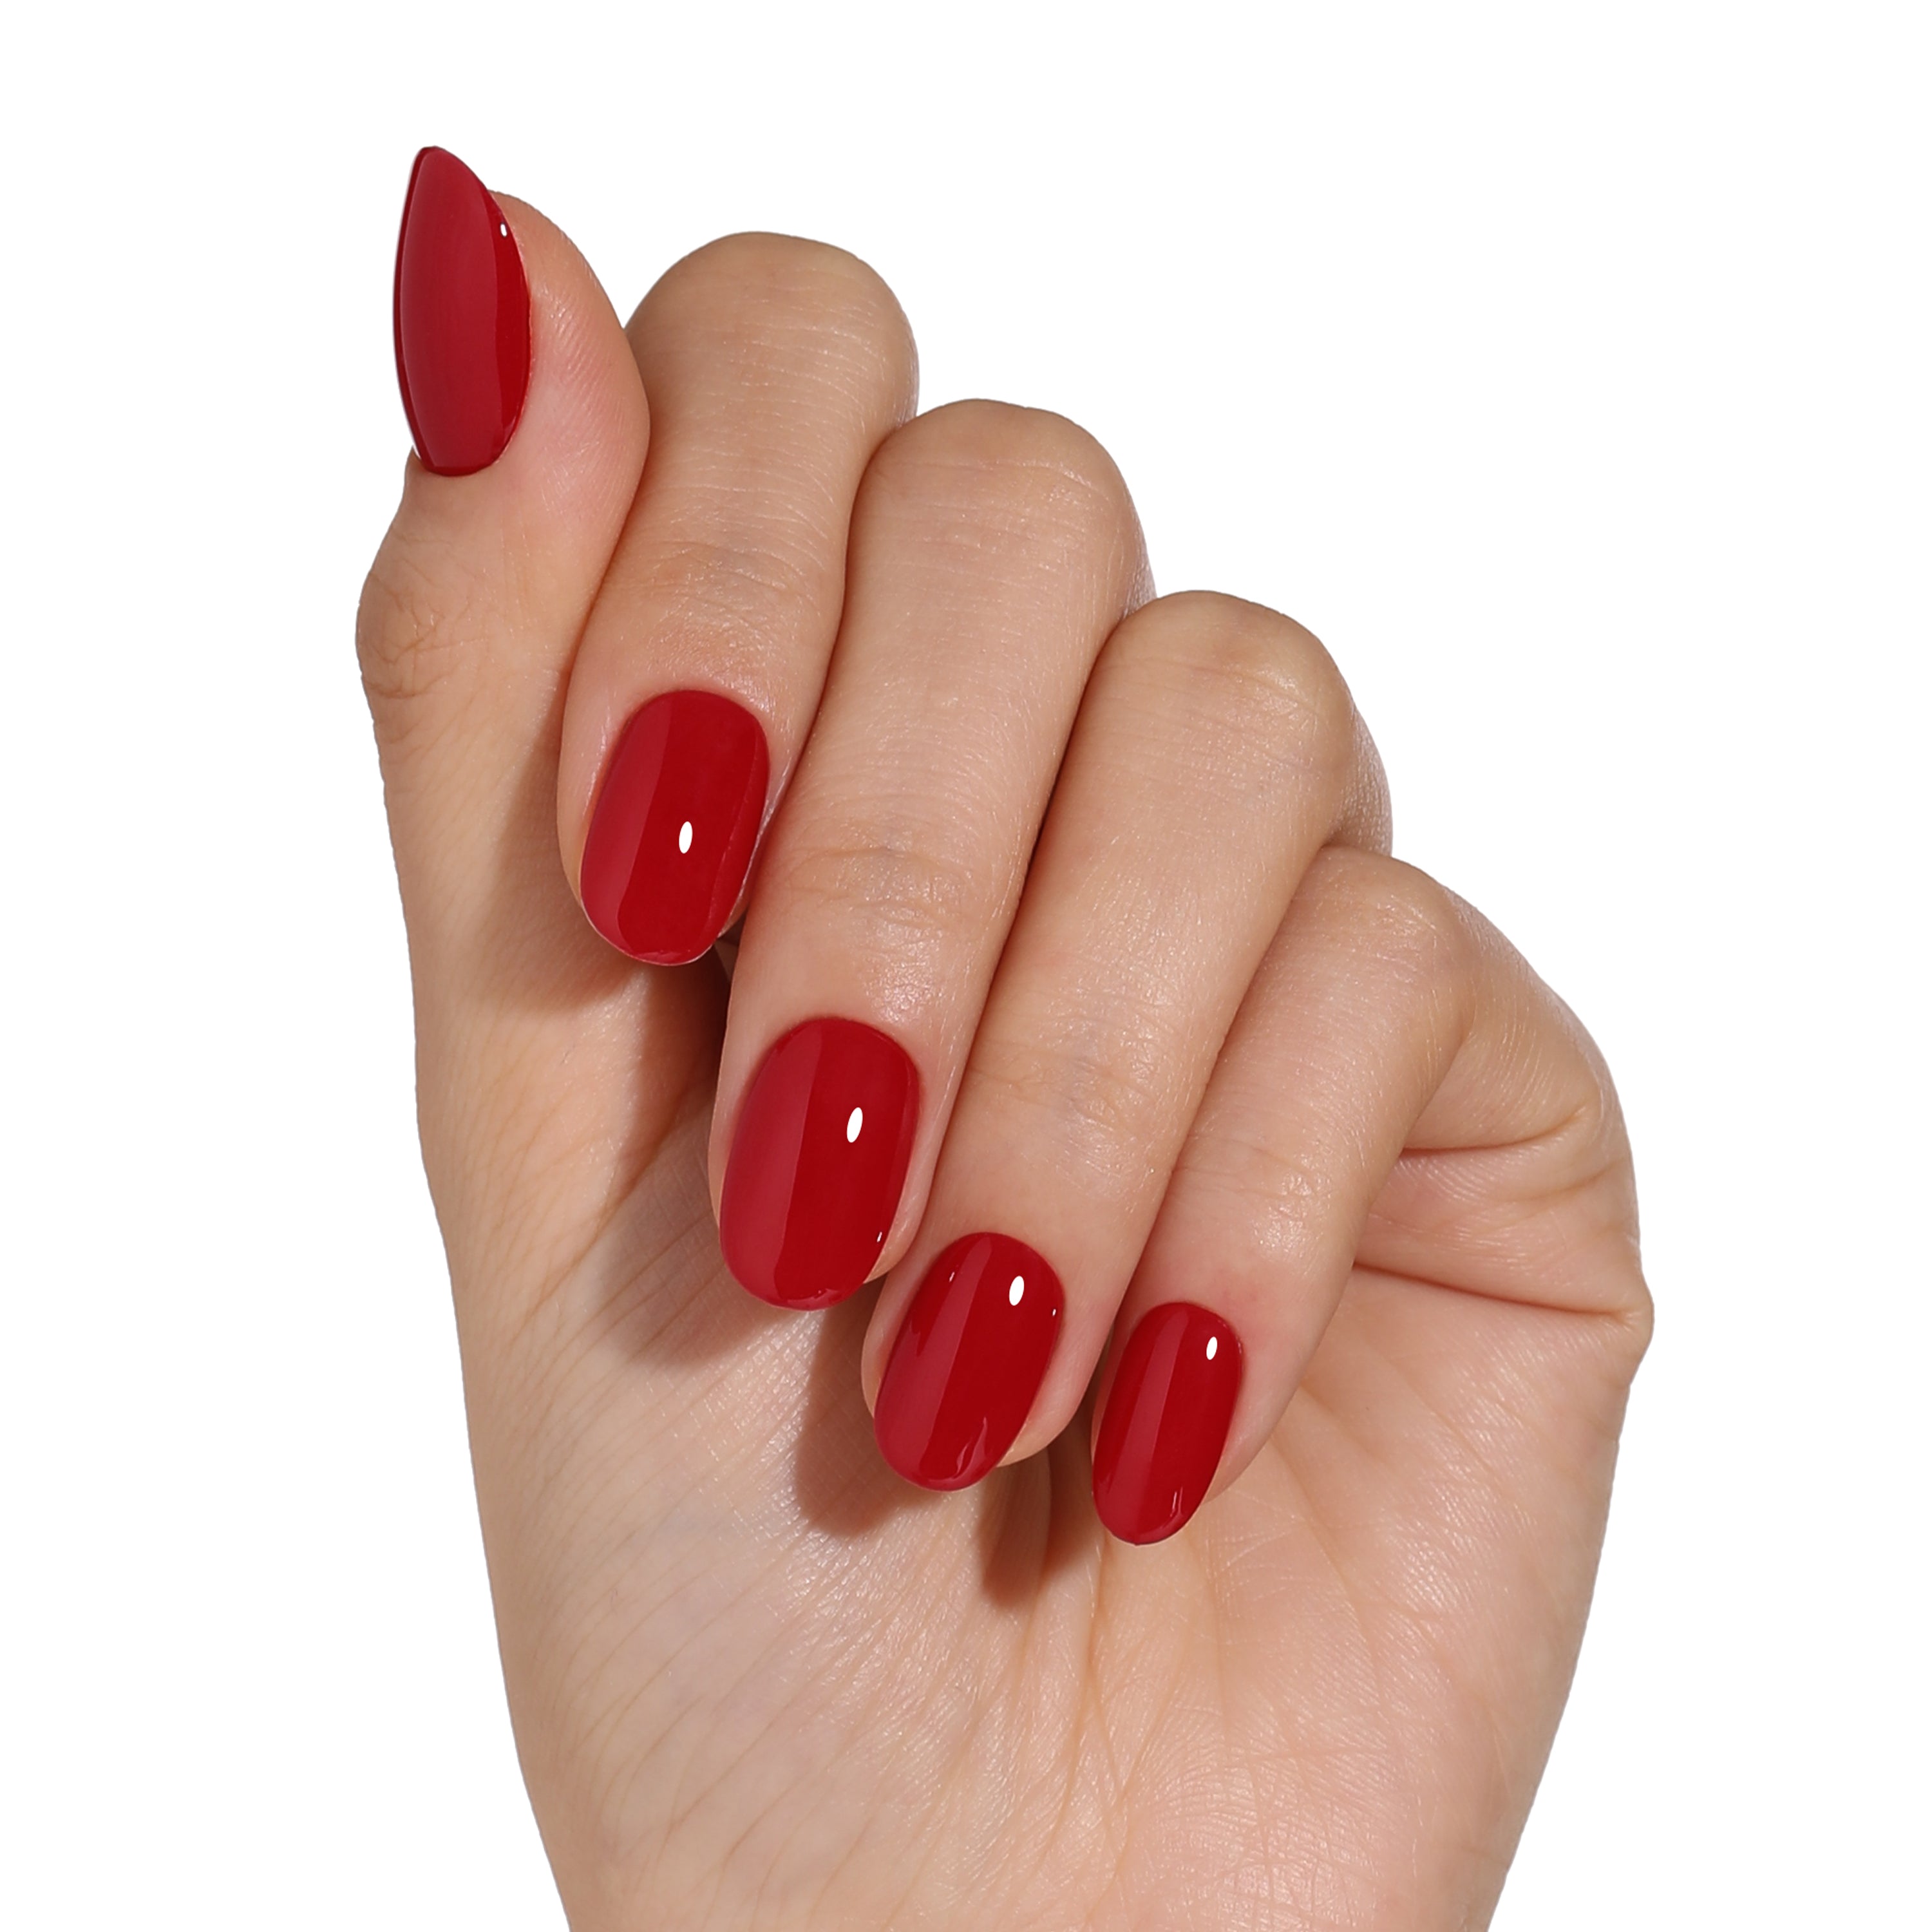 Winter 2022 | Red Proportion | Red Color | 10ml Gel Polish - BLUESKY